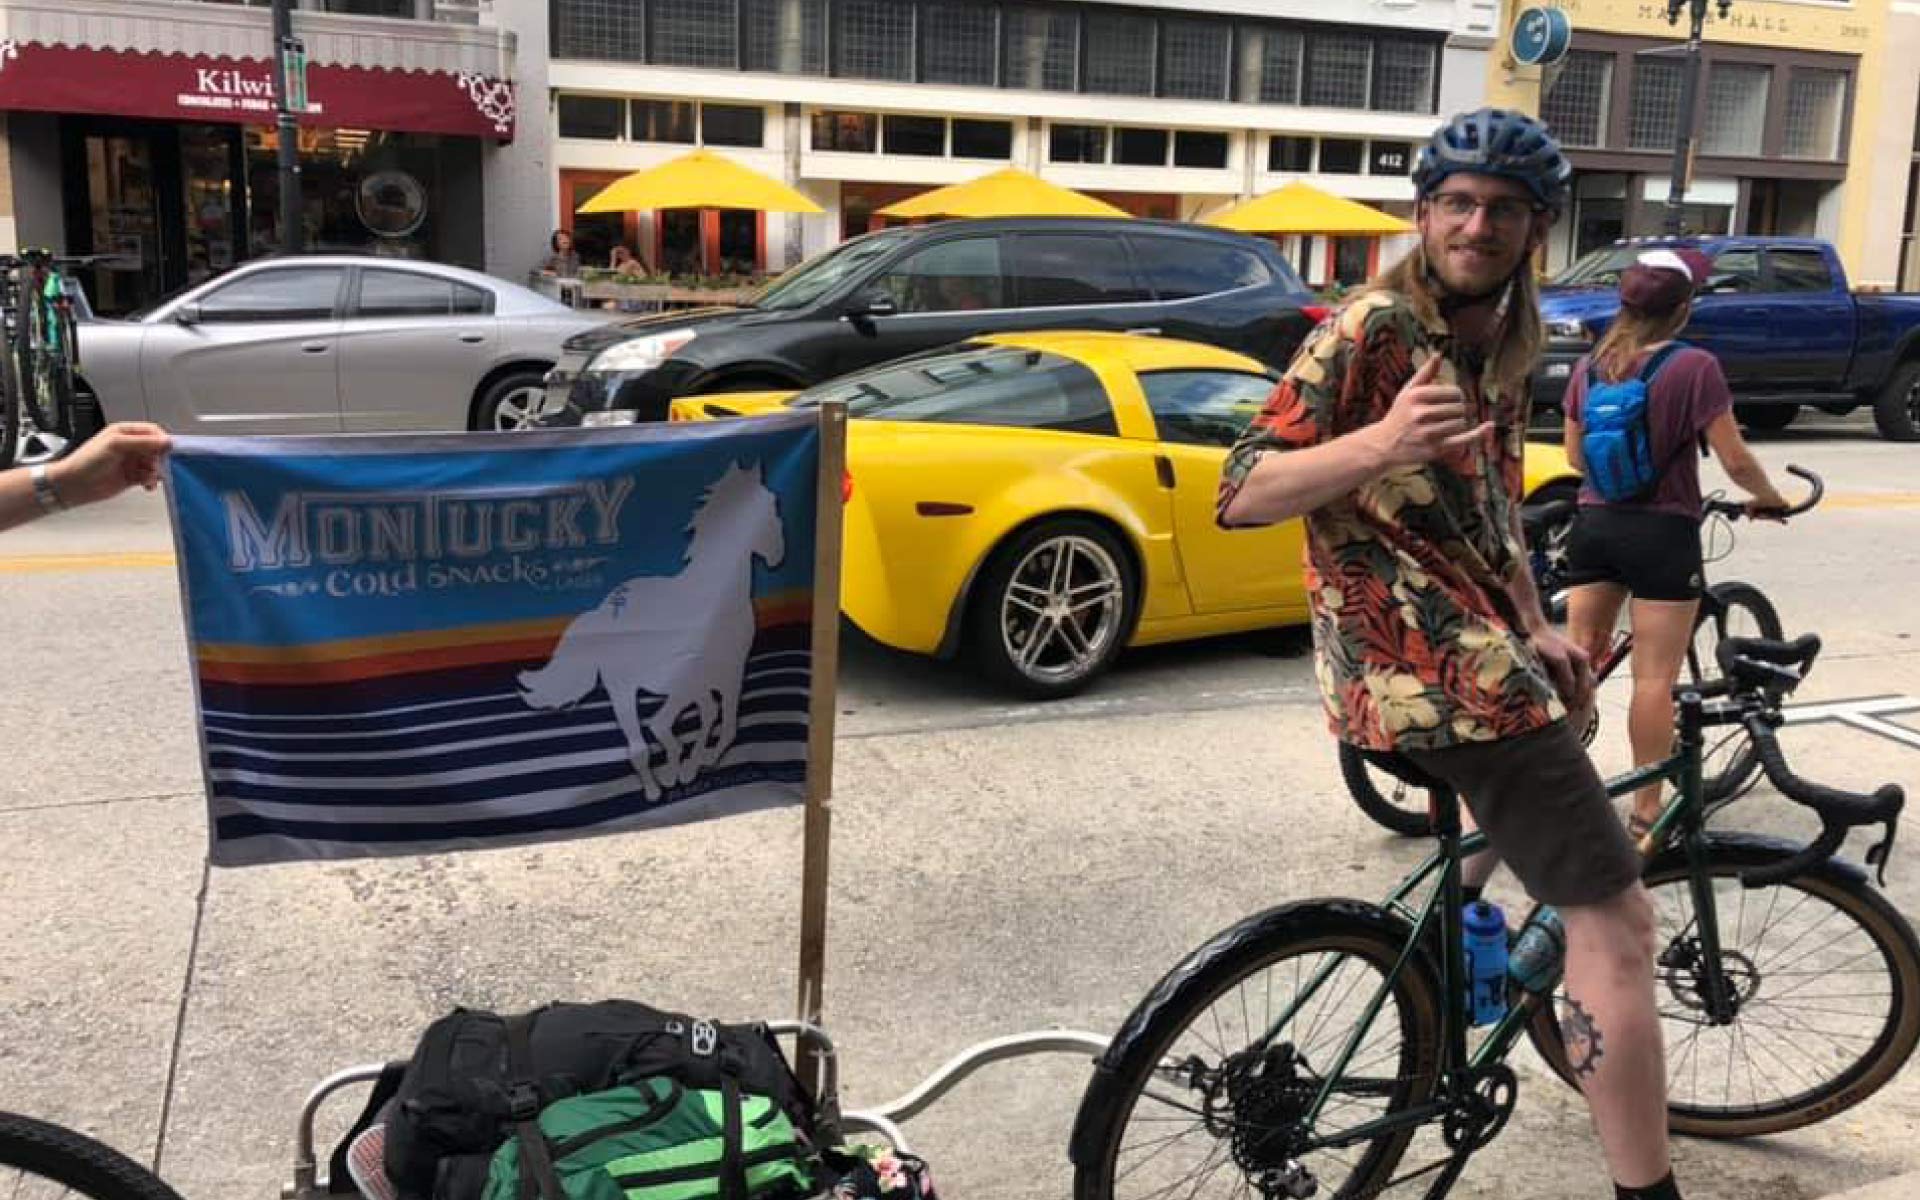 Evan on his bike in downtown Knoxville with a Montucky flag behind his bike